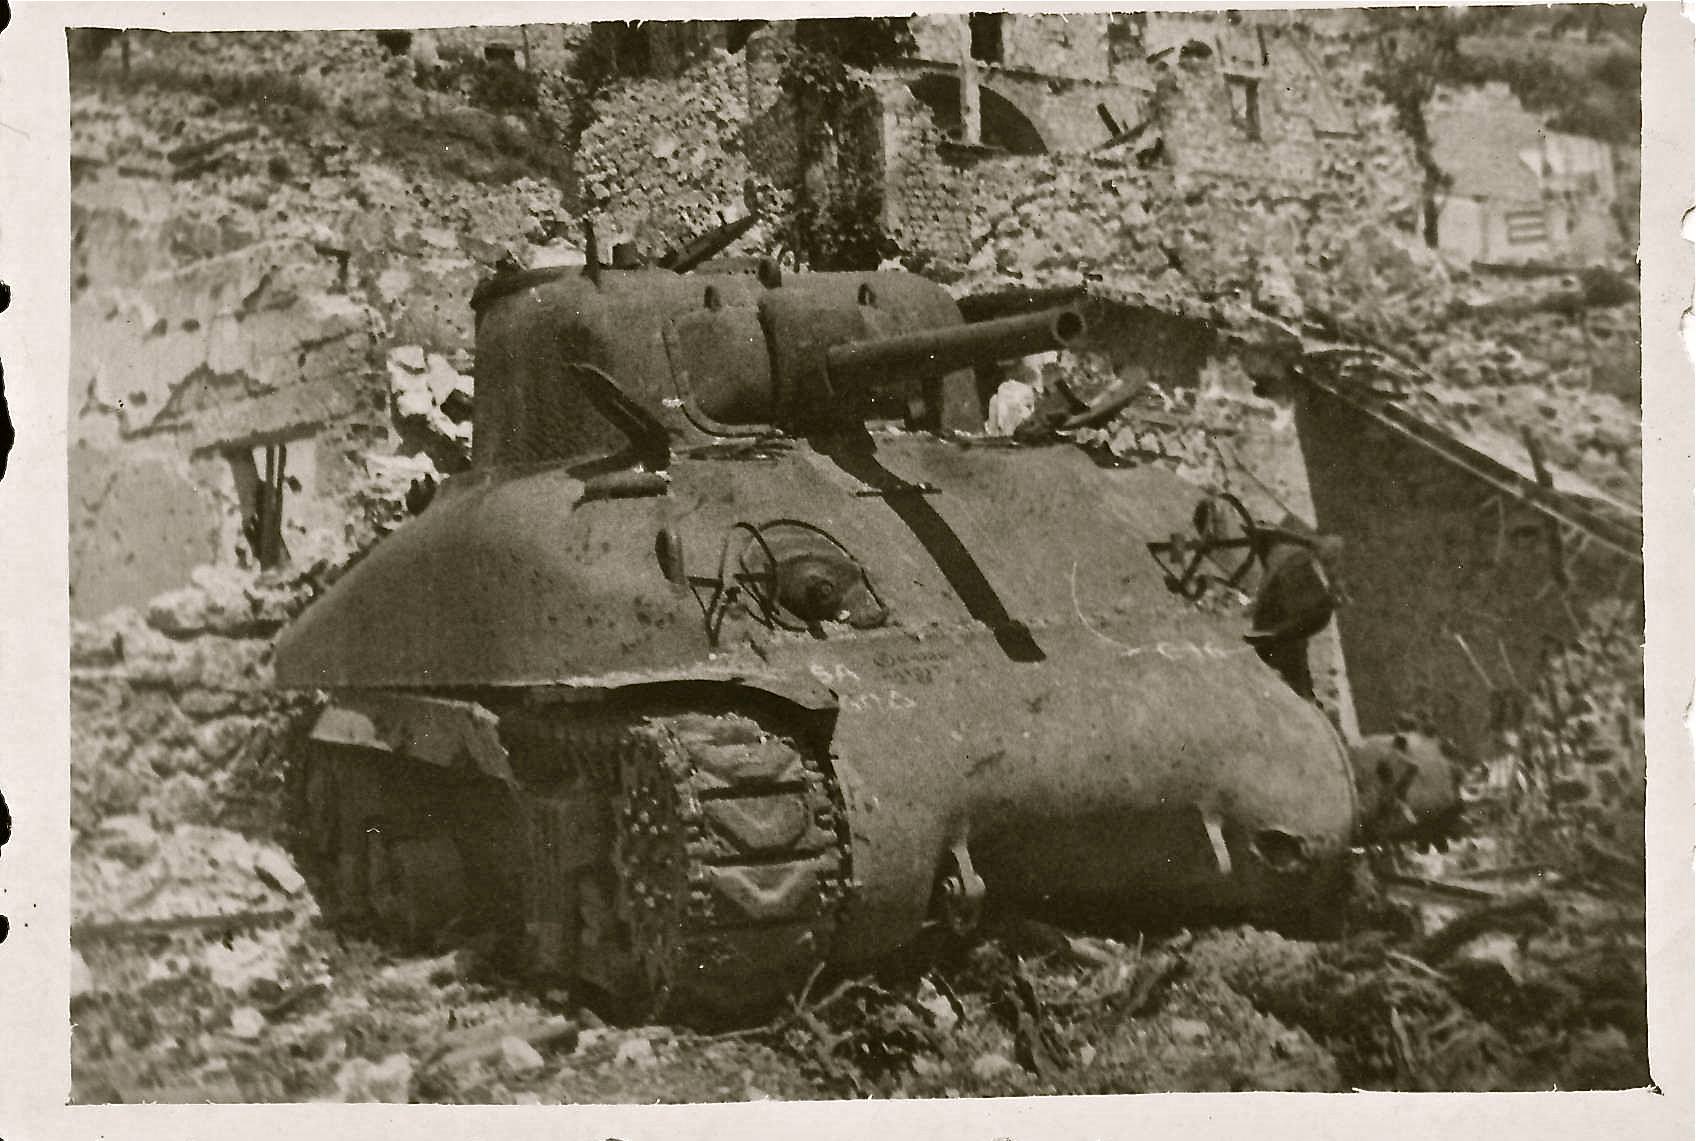 <p class='eng'>Cassino, May 19, 1944. It is a tank hit by the Germans in the northern suburbs of Cassino, near the prison ("the Jail") during the clashes in early February 1944. It is not clear whether it belonged to the 756th or 760th US Tank Battalion. The photograph was taken by a Polish artilleryman.<br /><br />We thank Giancarlo Langiano for confirming the location of the shot.</p>